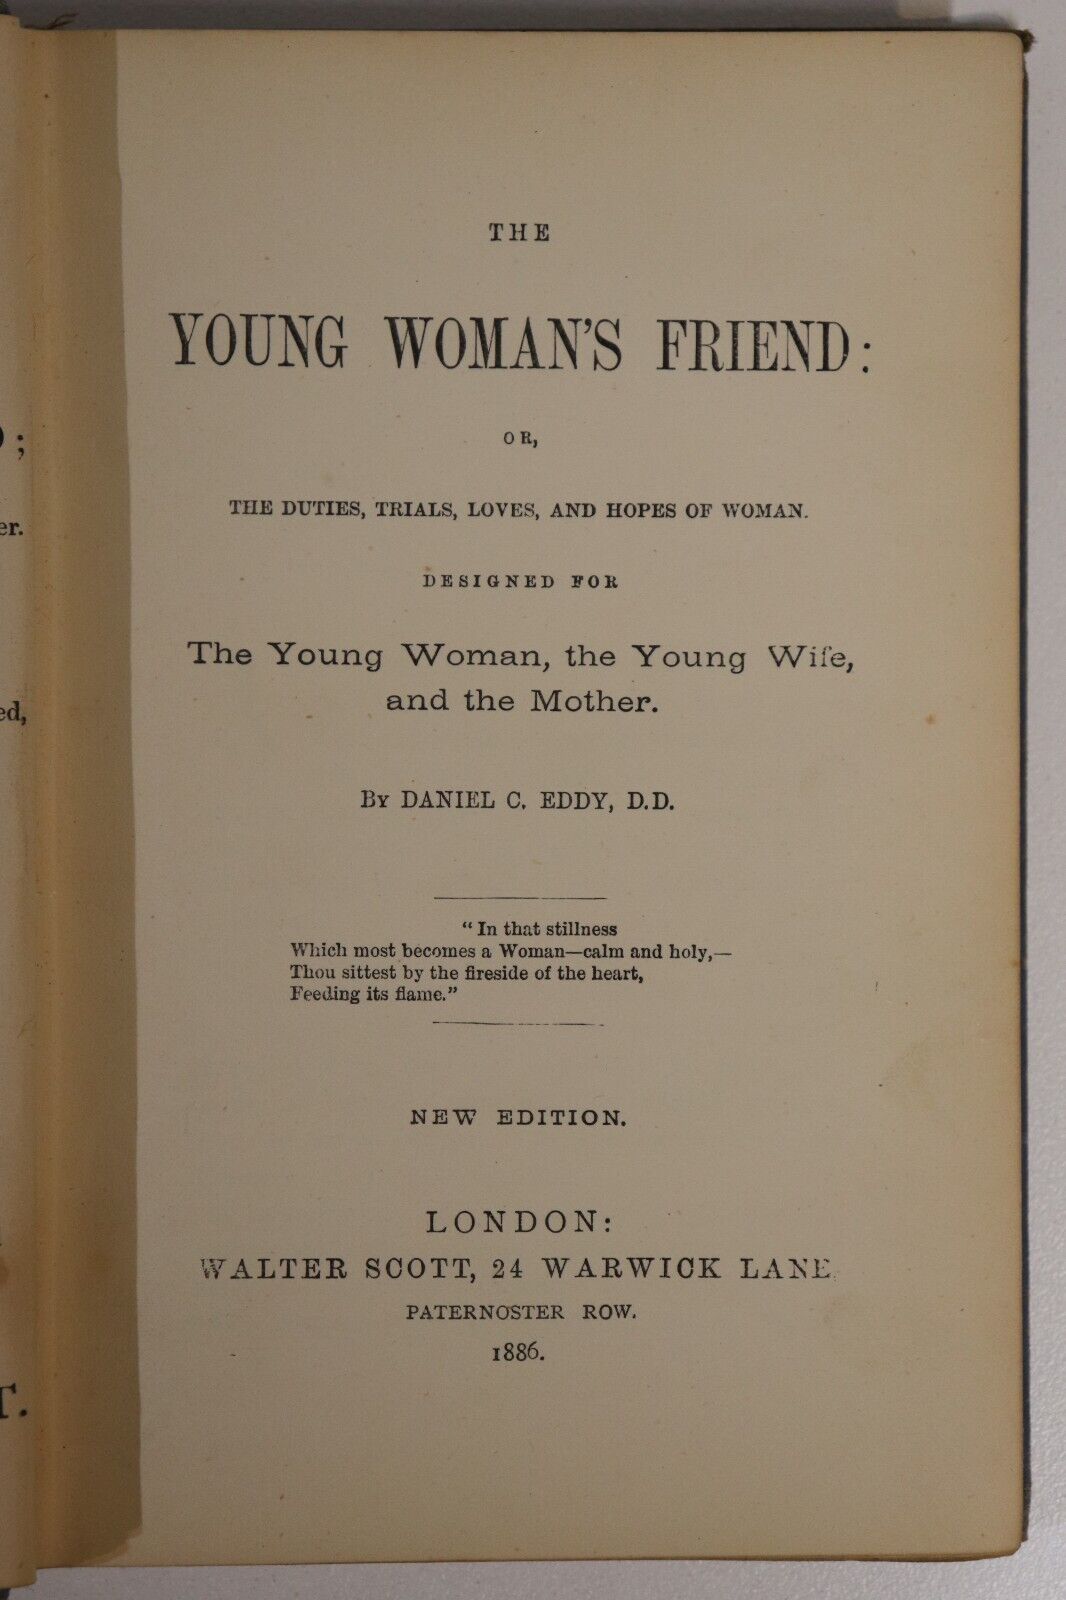 The Young Woman's Friend by D.C. Eddy - 1886 - Antique Social Commentary Book - 0